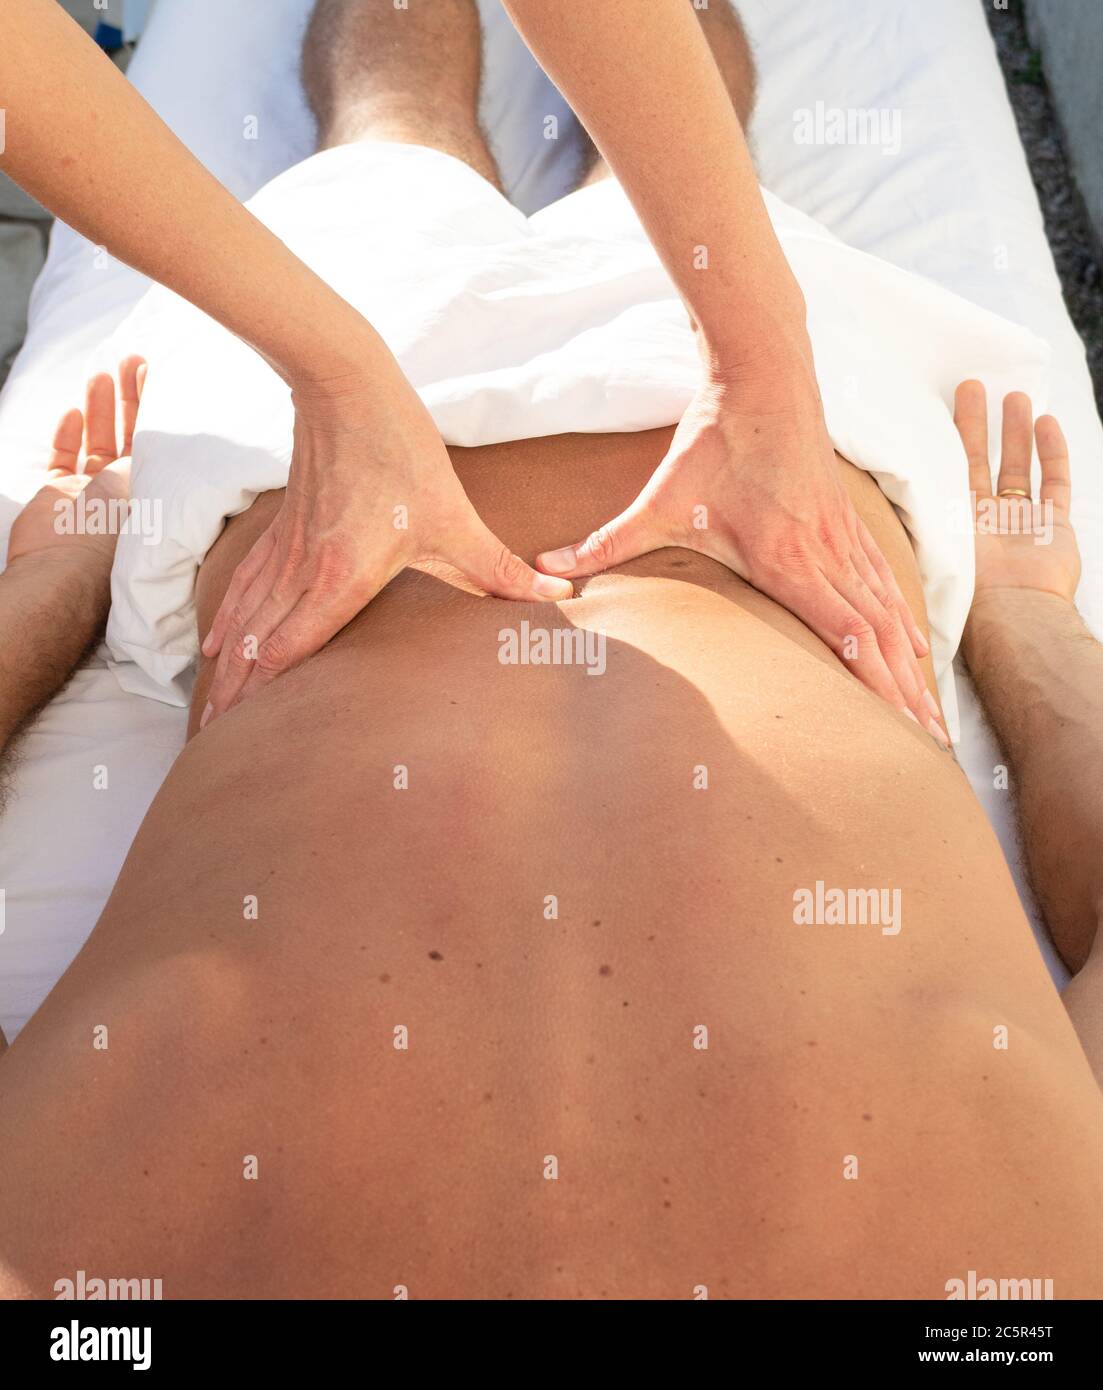 Massage to relax and recover Stock Photo